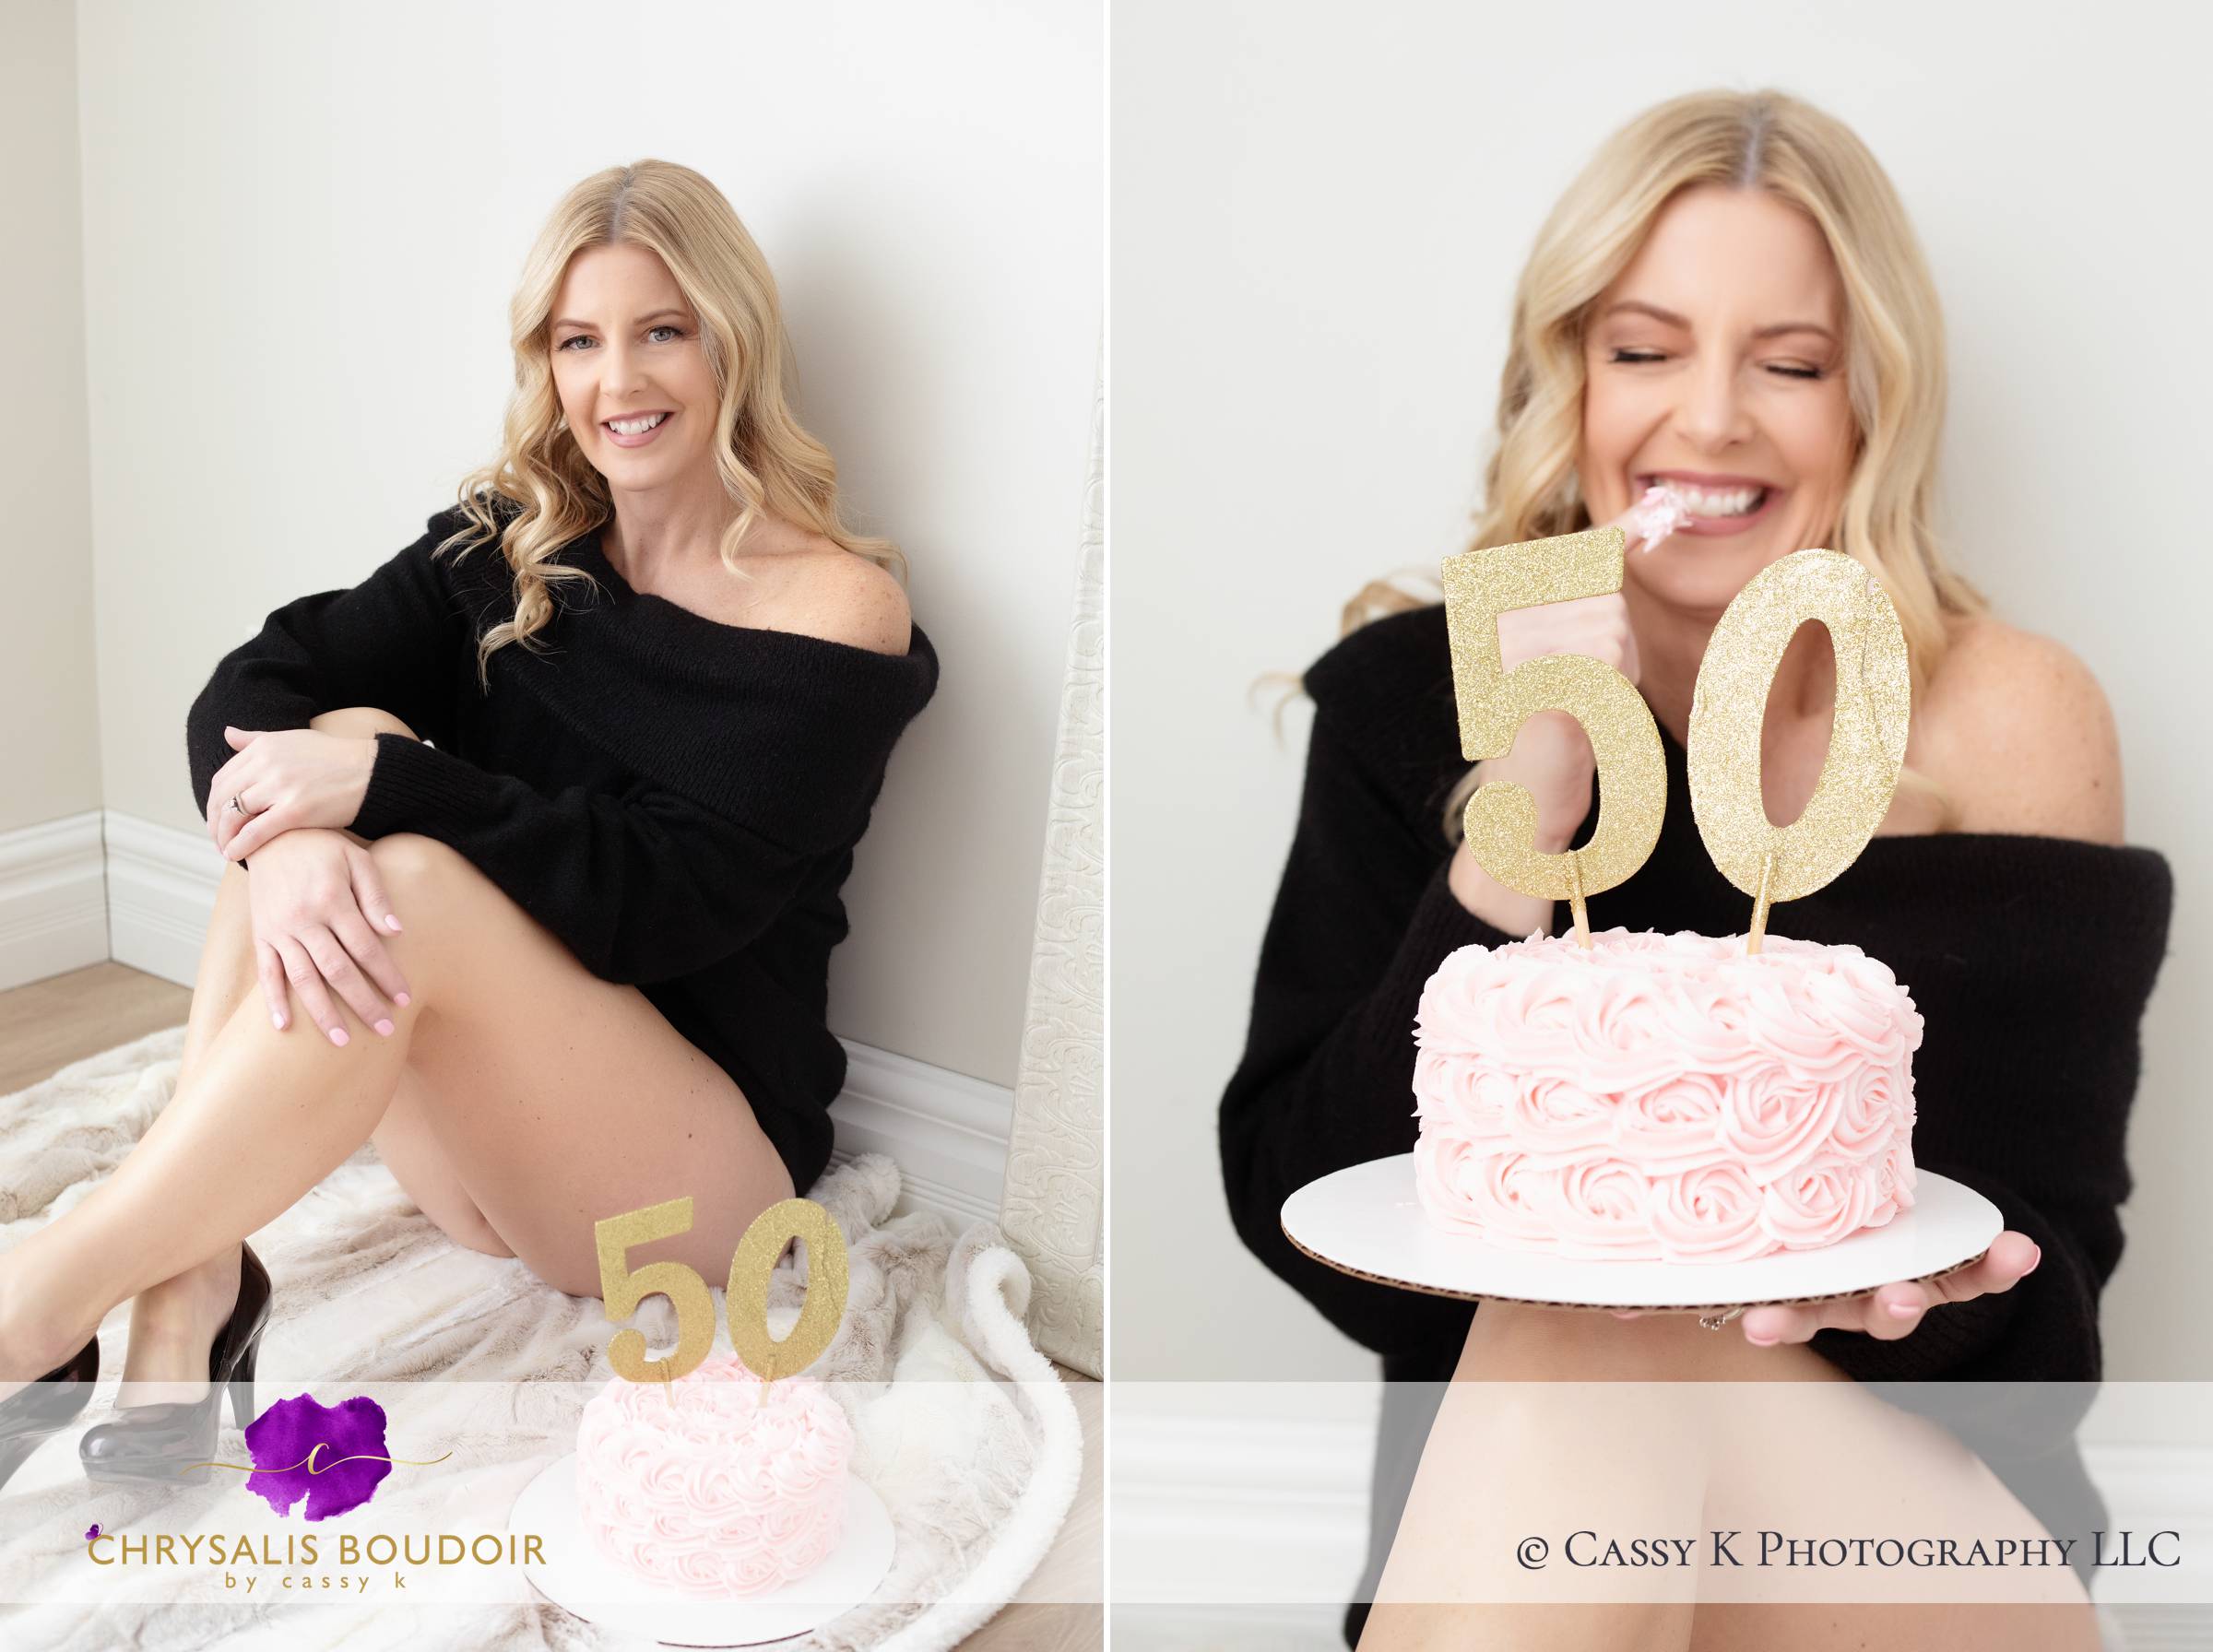 Blond hair and blue eyed woman celebrating 50 in Boudoir Photoshoot